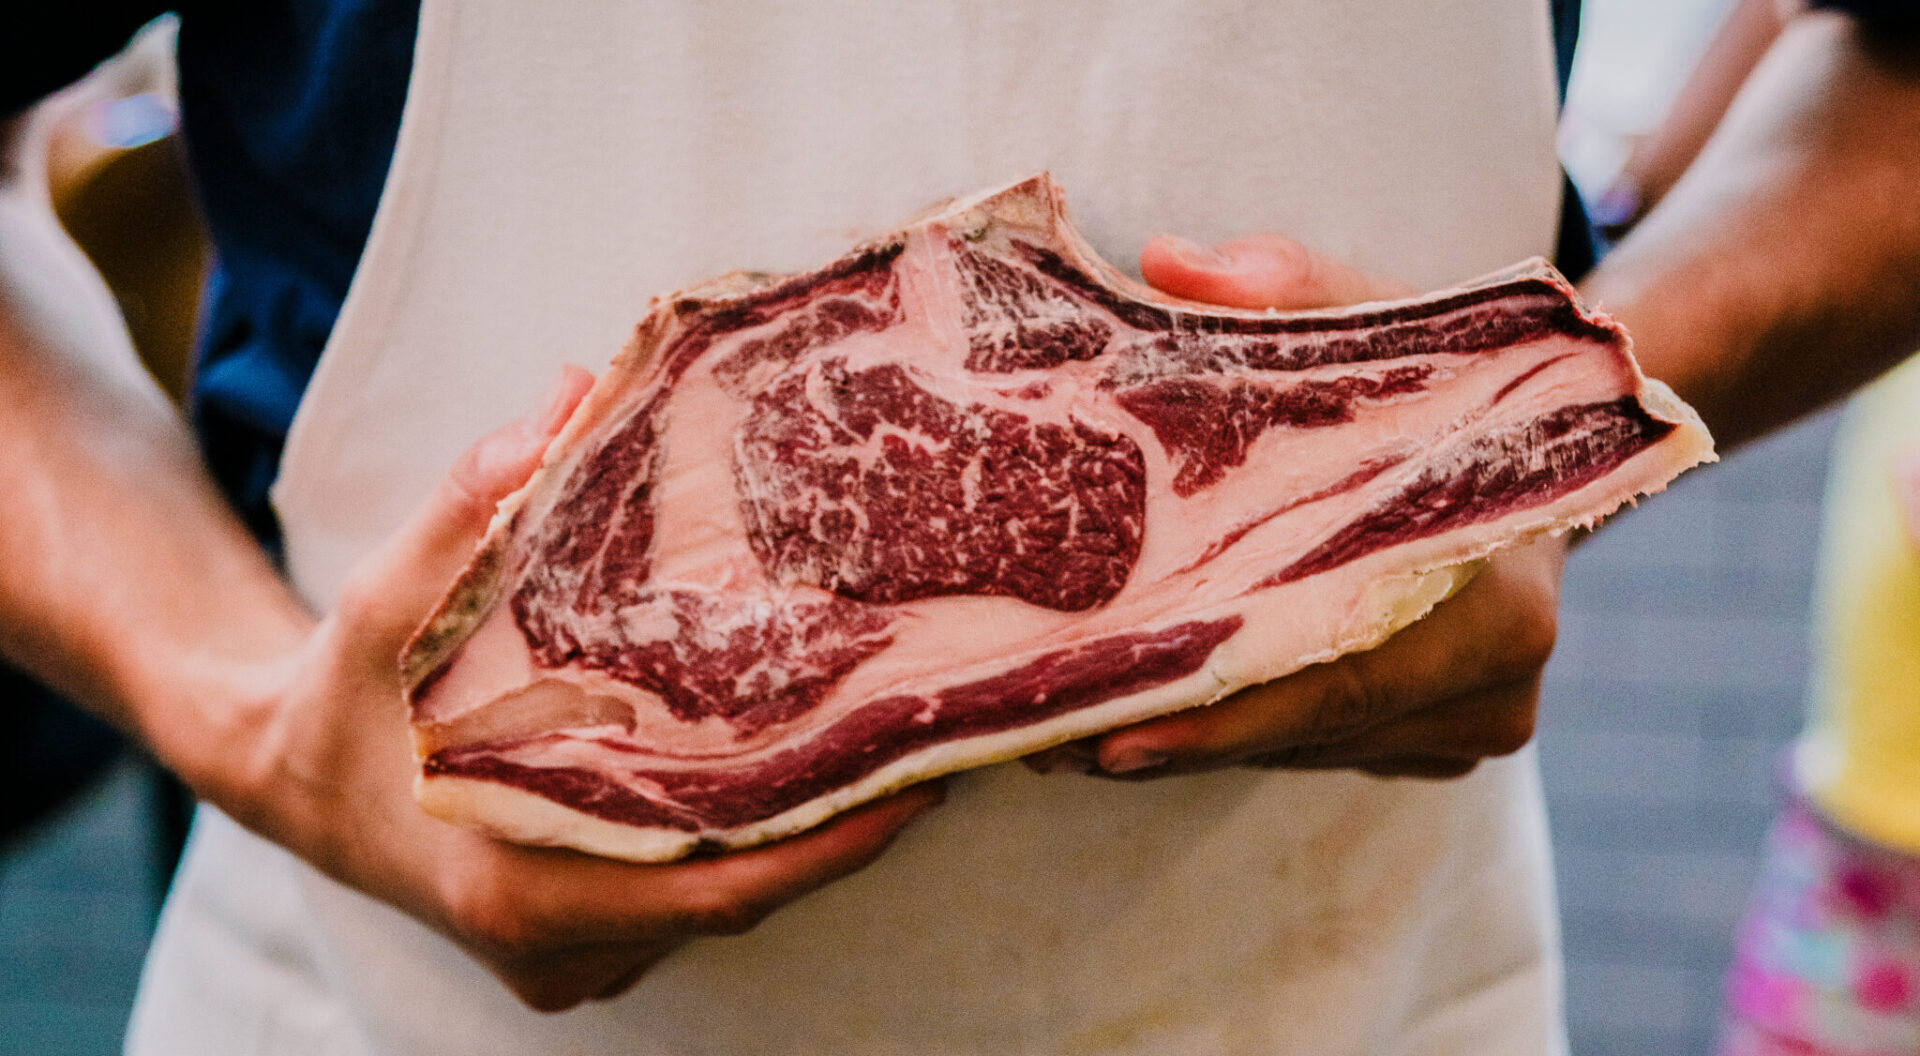 A butcher is holding a large piece of raw meat.